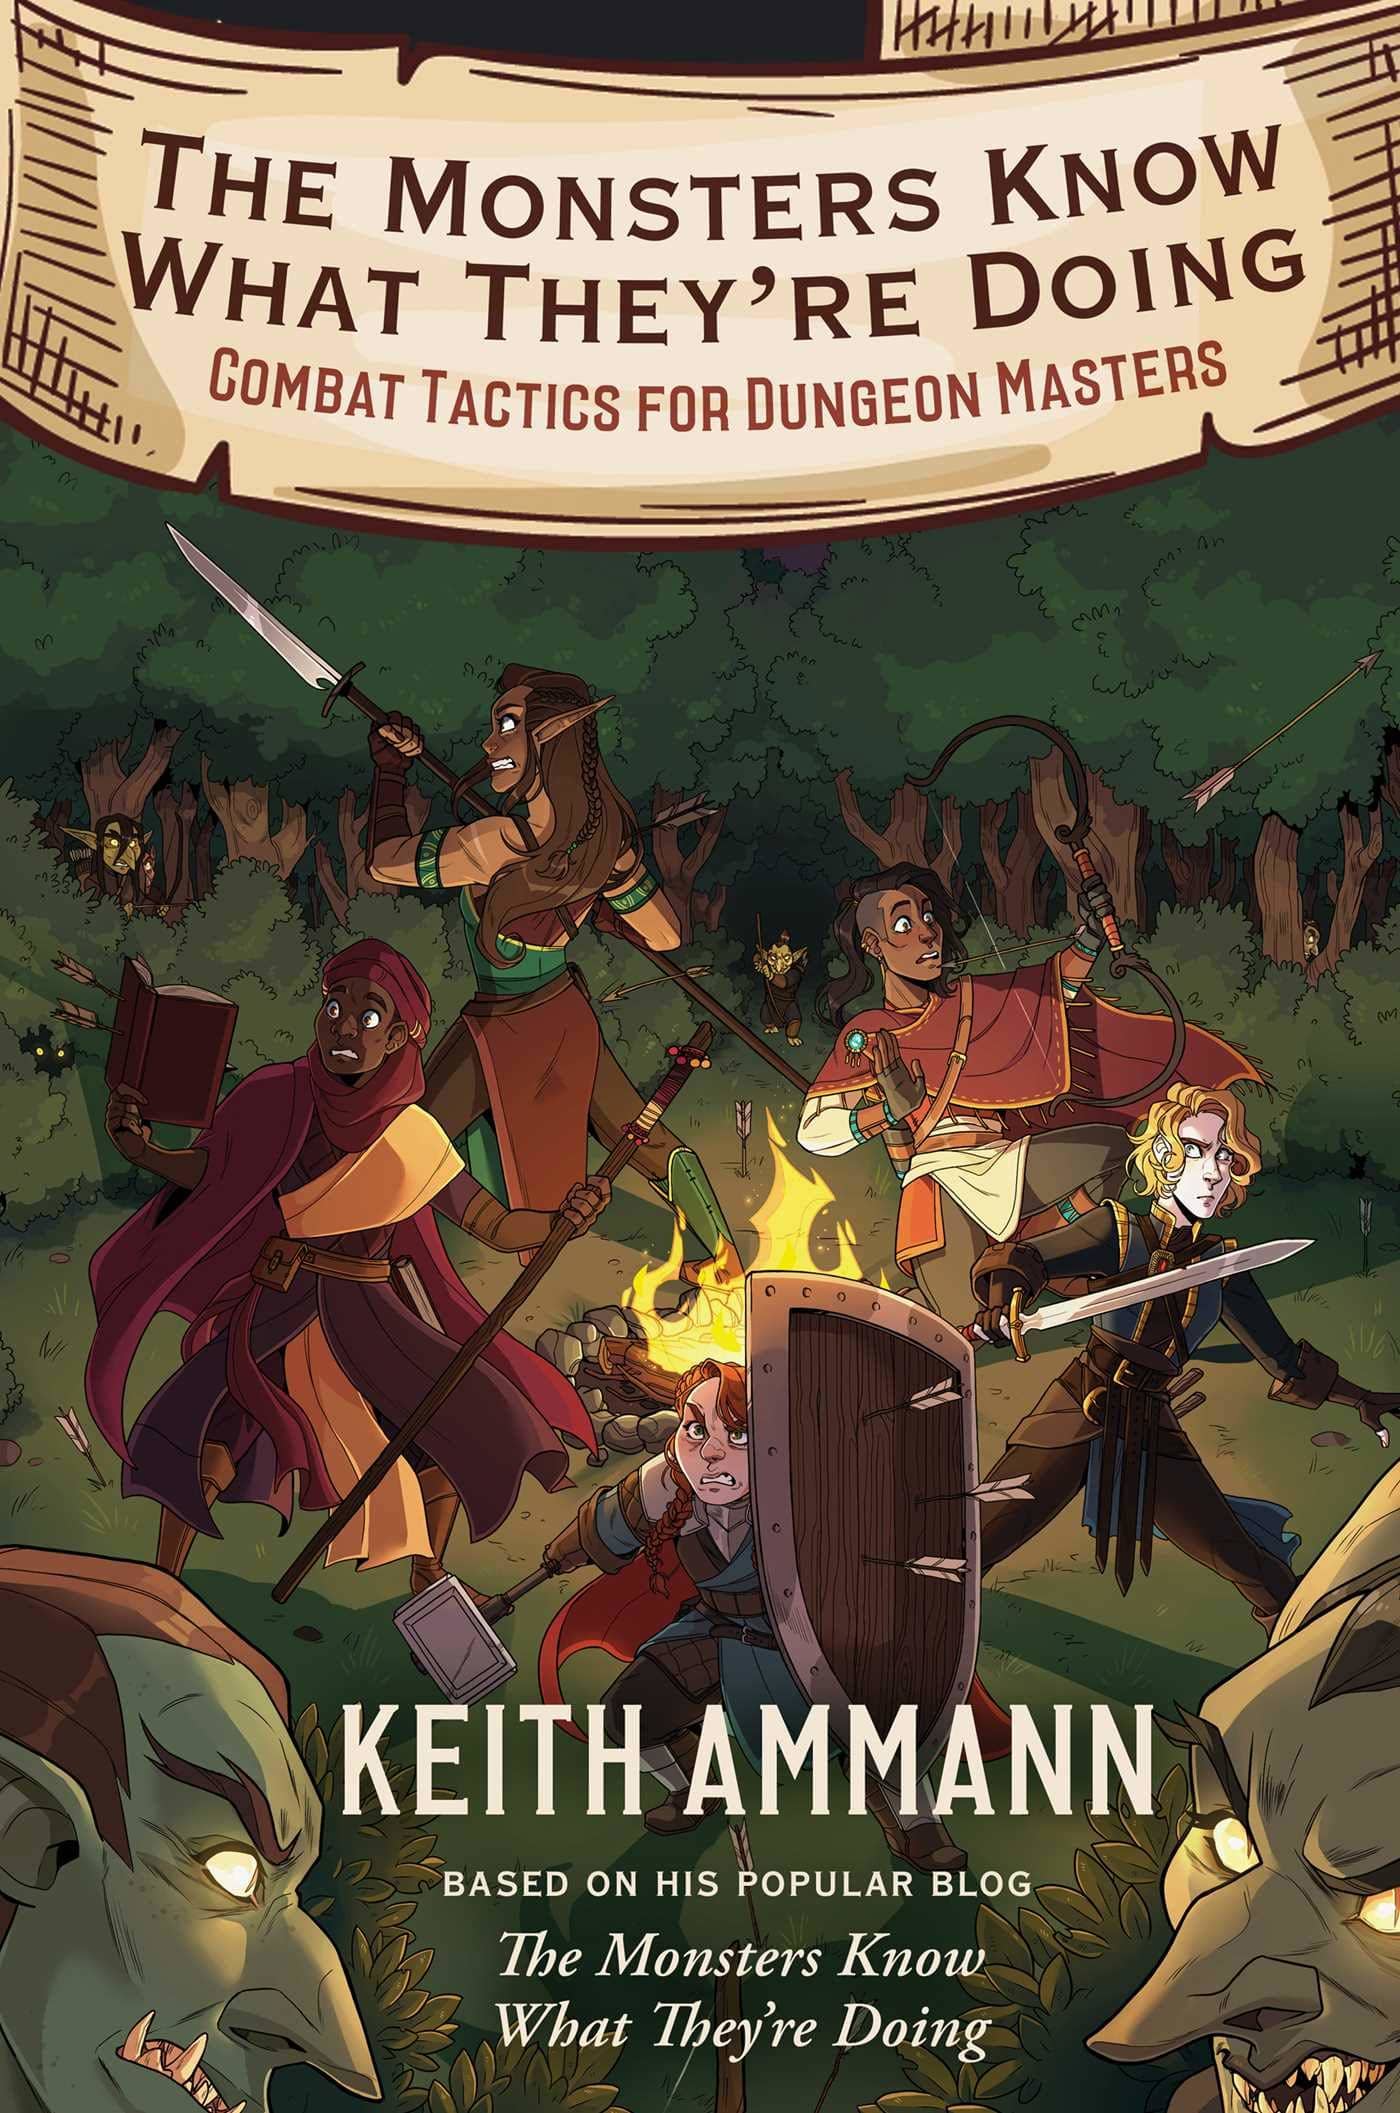 New Treasures: The Monsters Know What They’re Doing by Keith Ammann